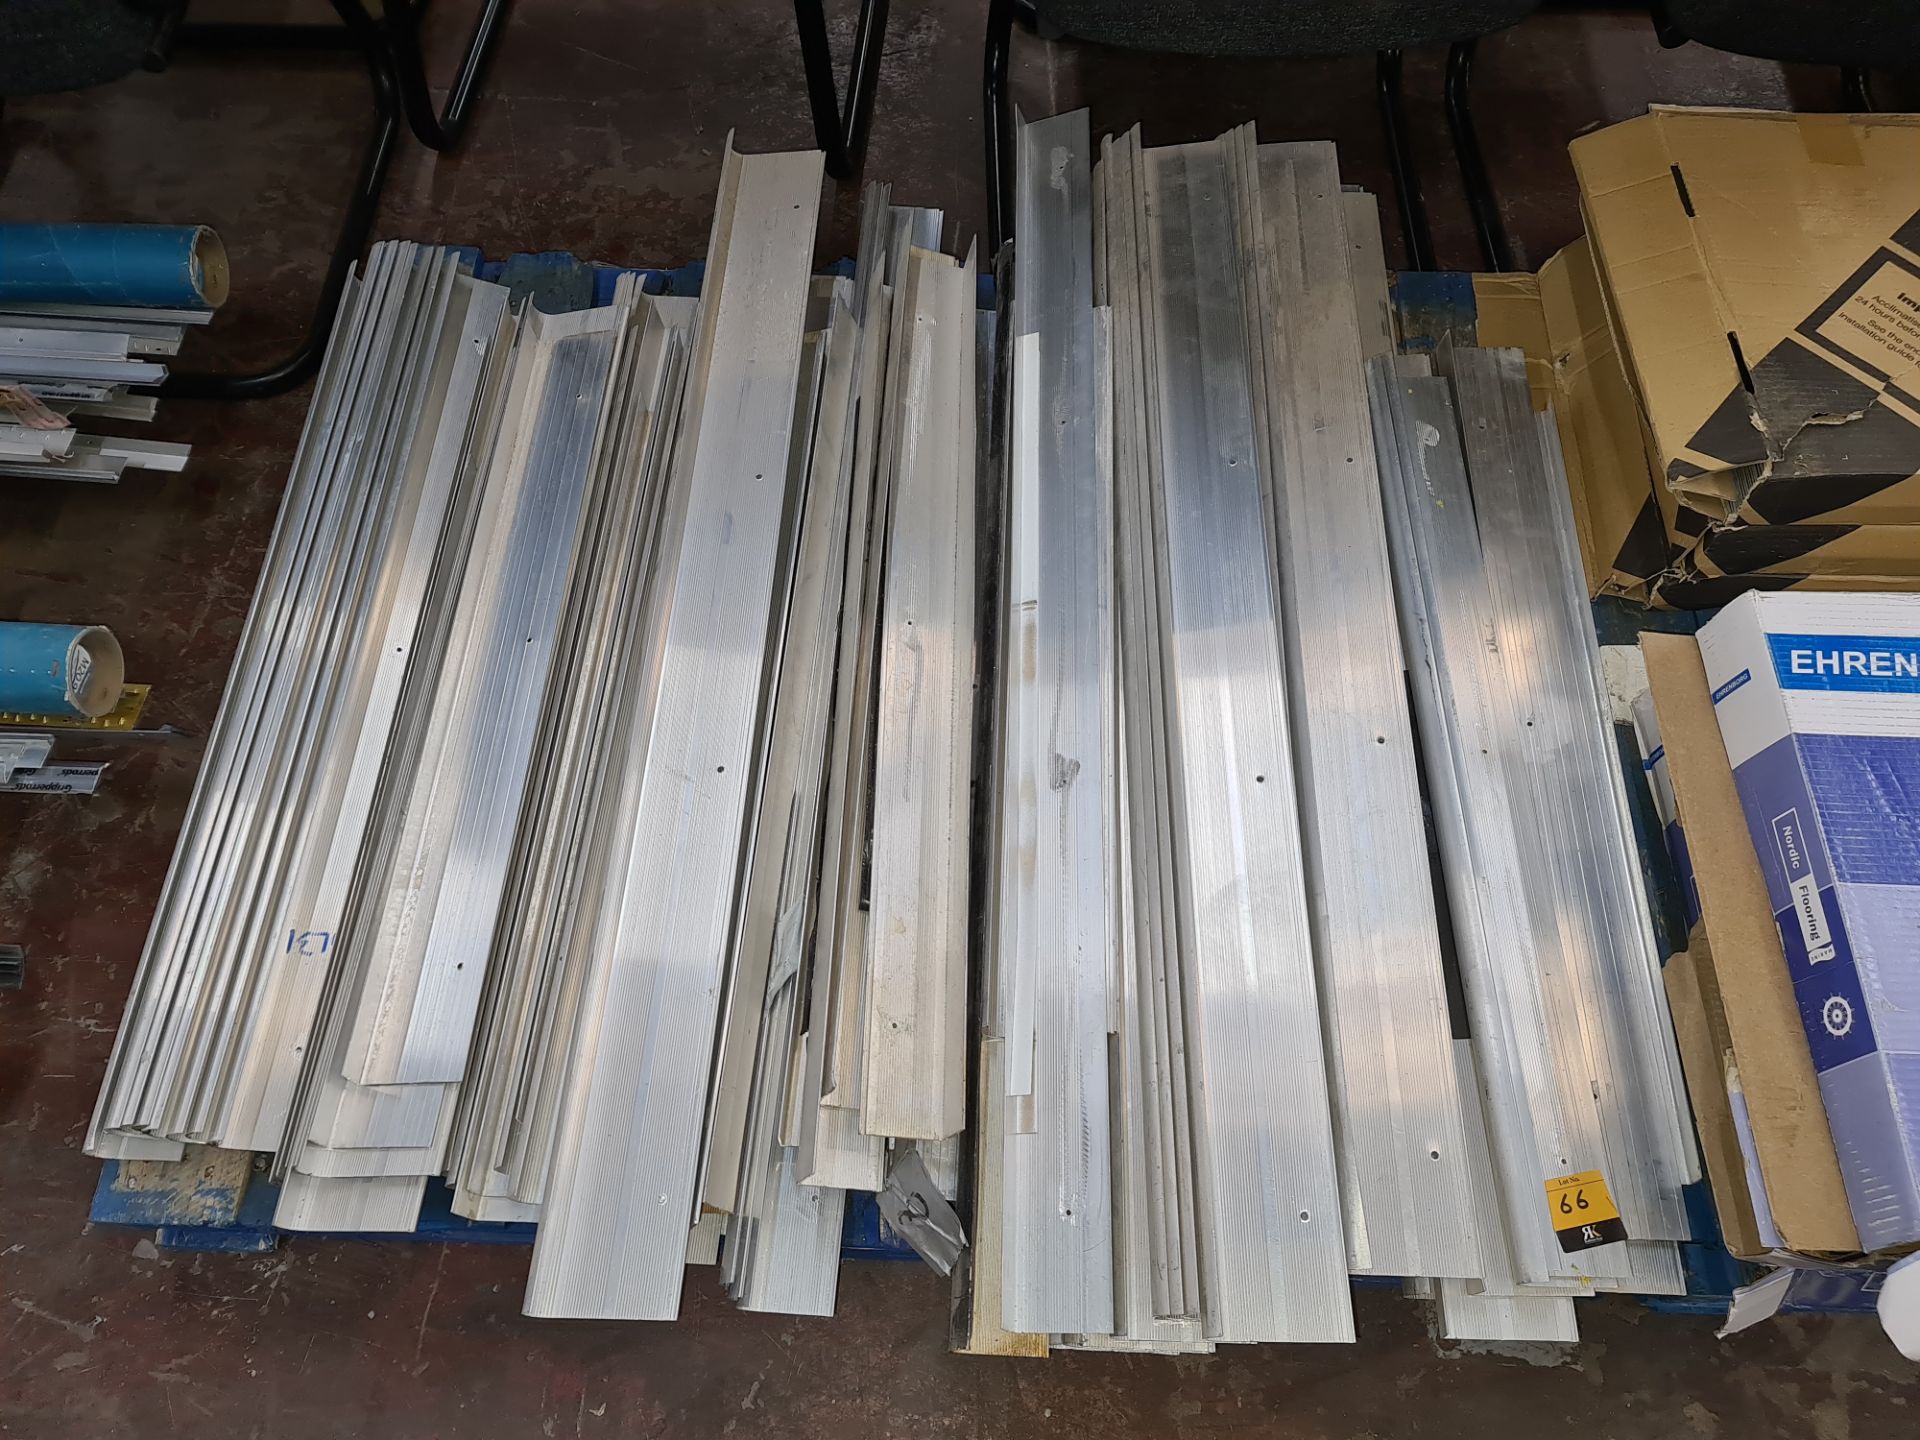 Large quantity of aluminium edging strip for use with assorted flooring